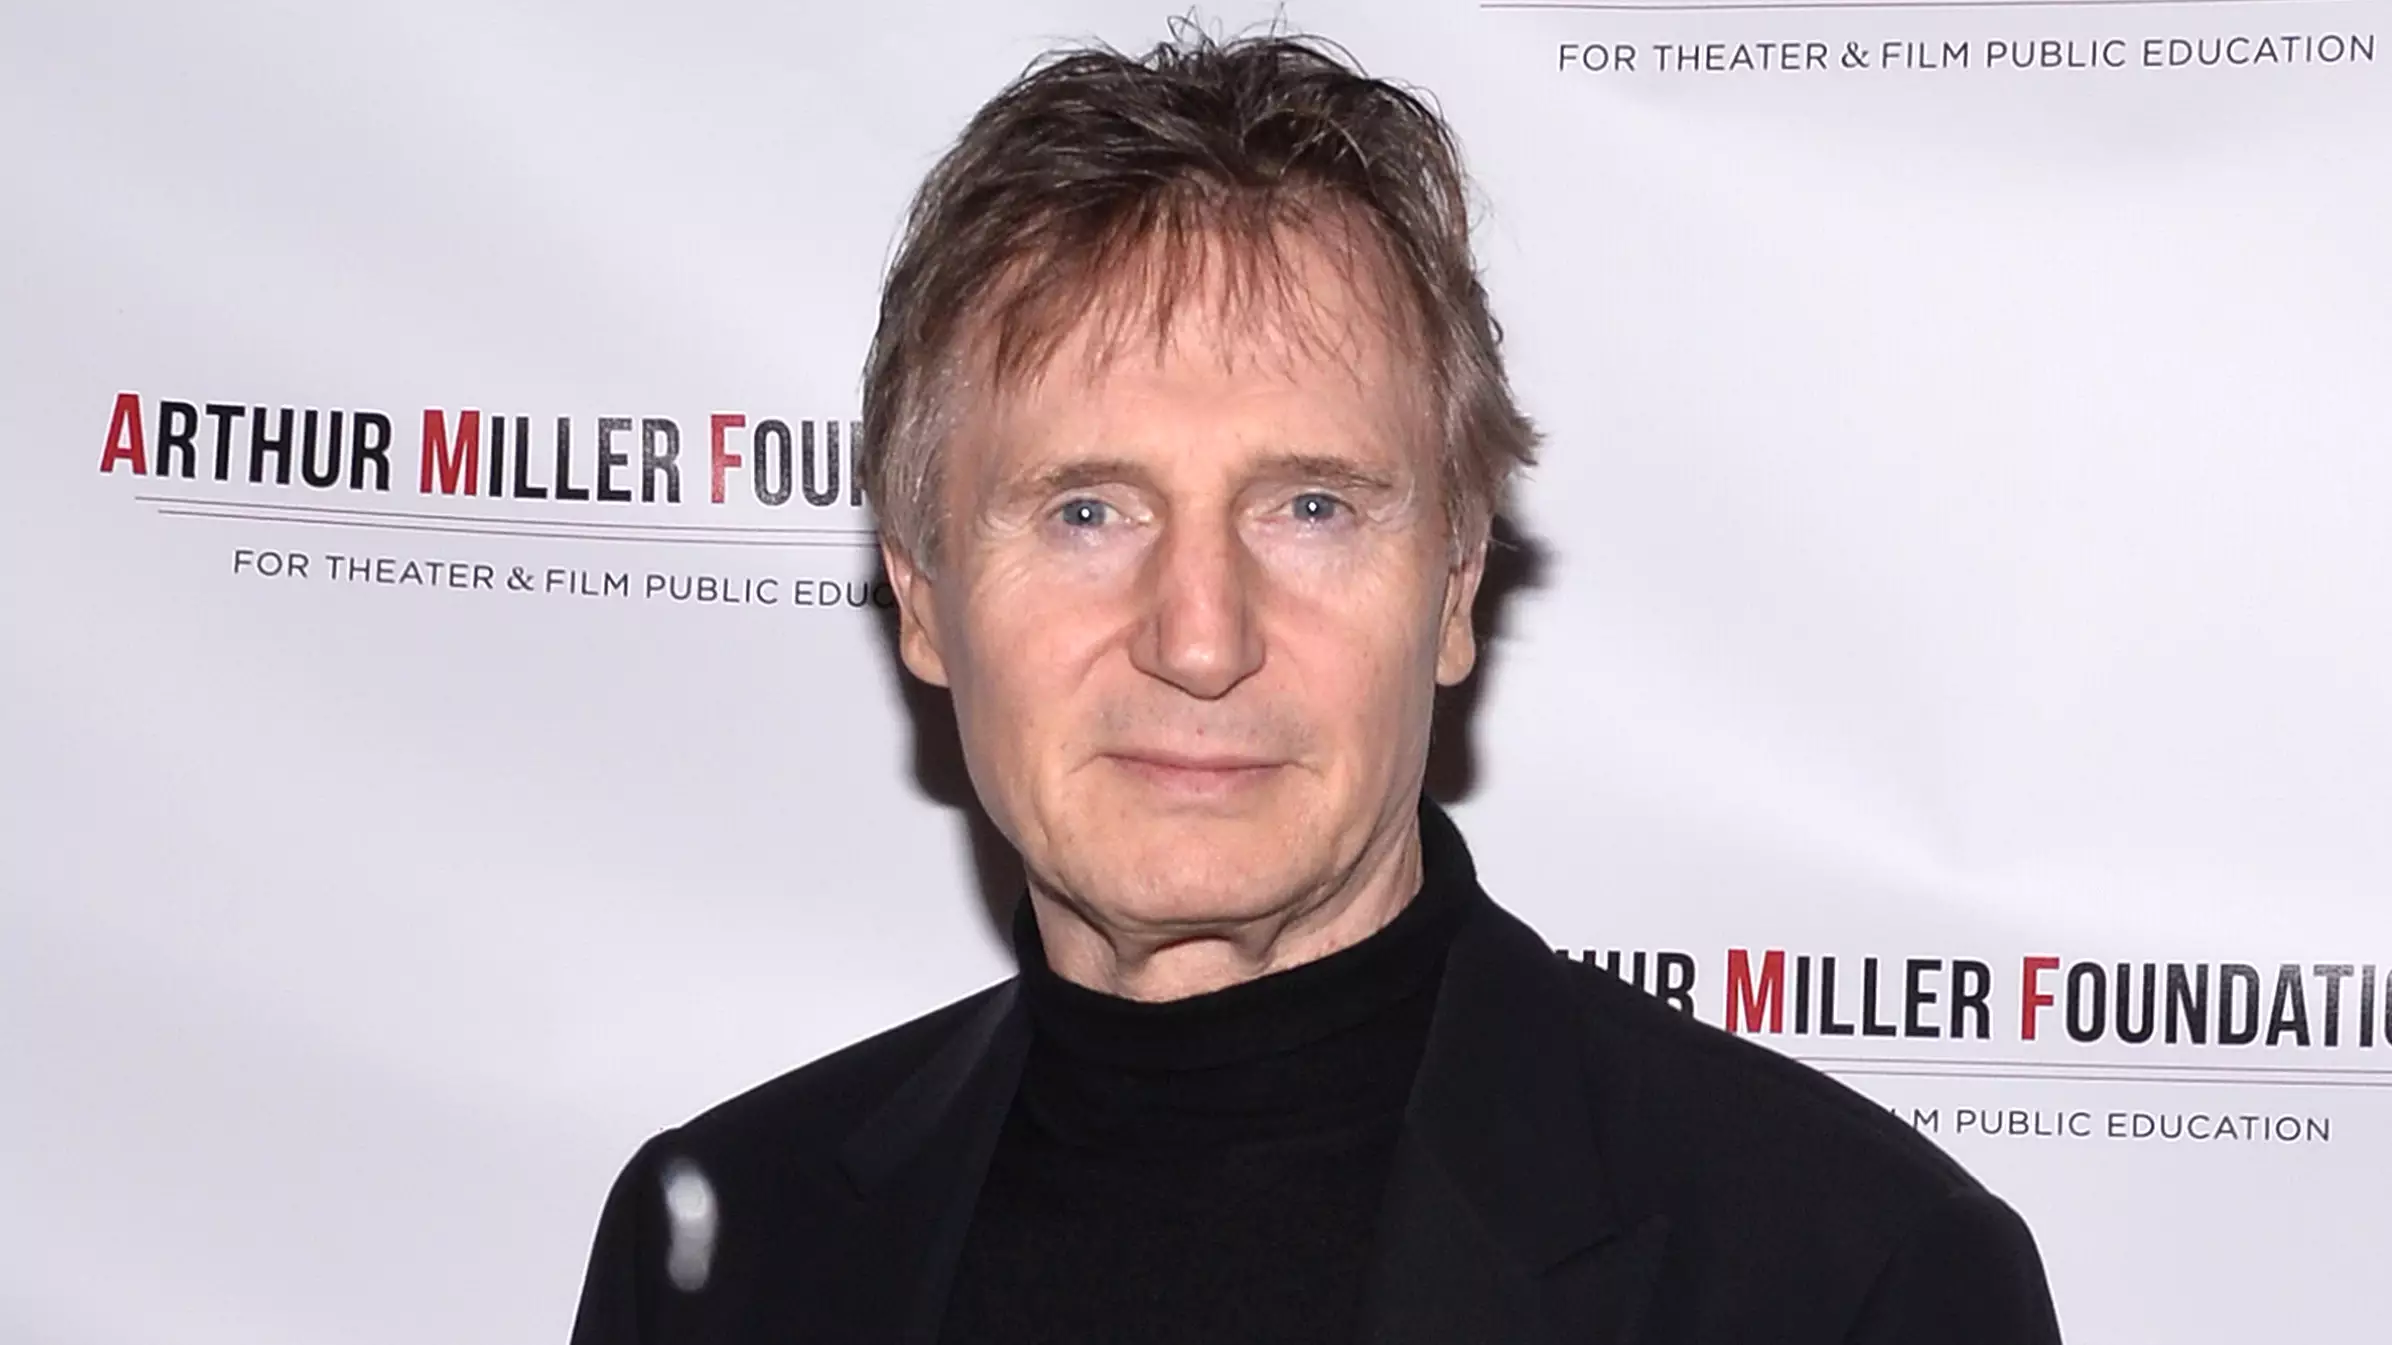 Liam Neeson's New Film Is Set To Take In $10m Over Opening Weekend